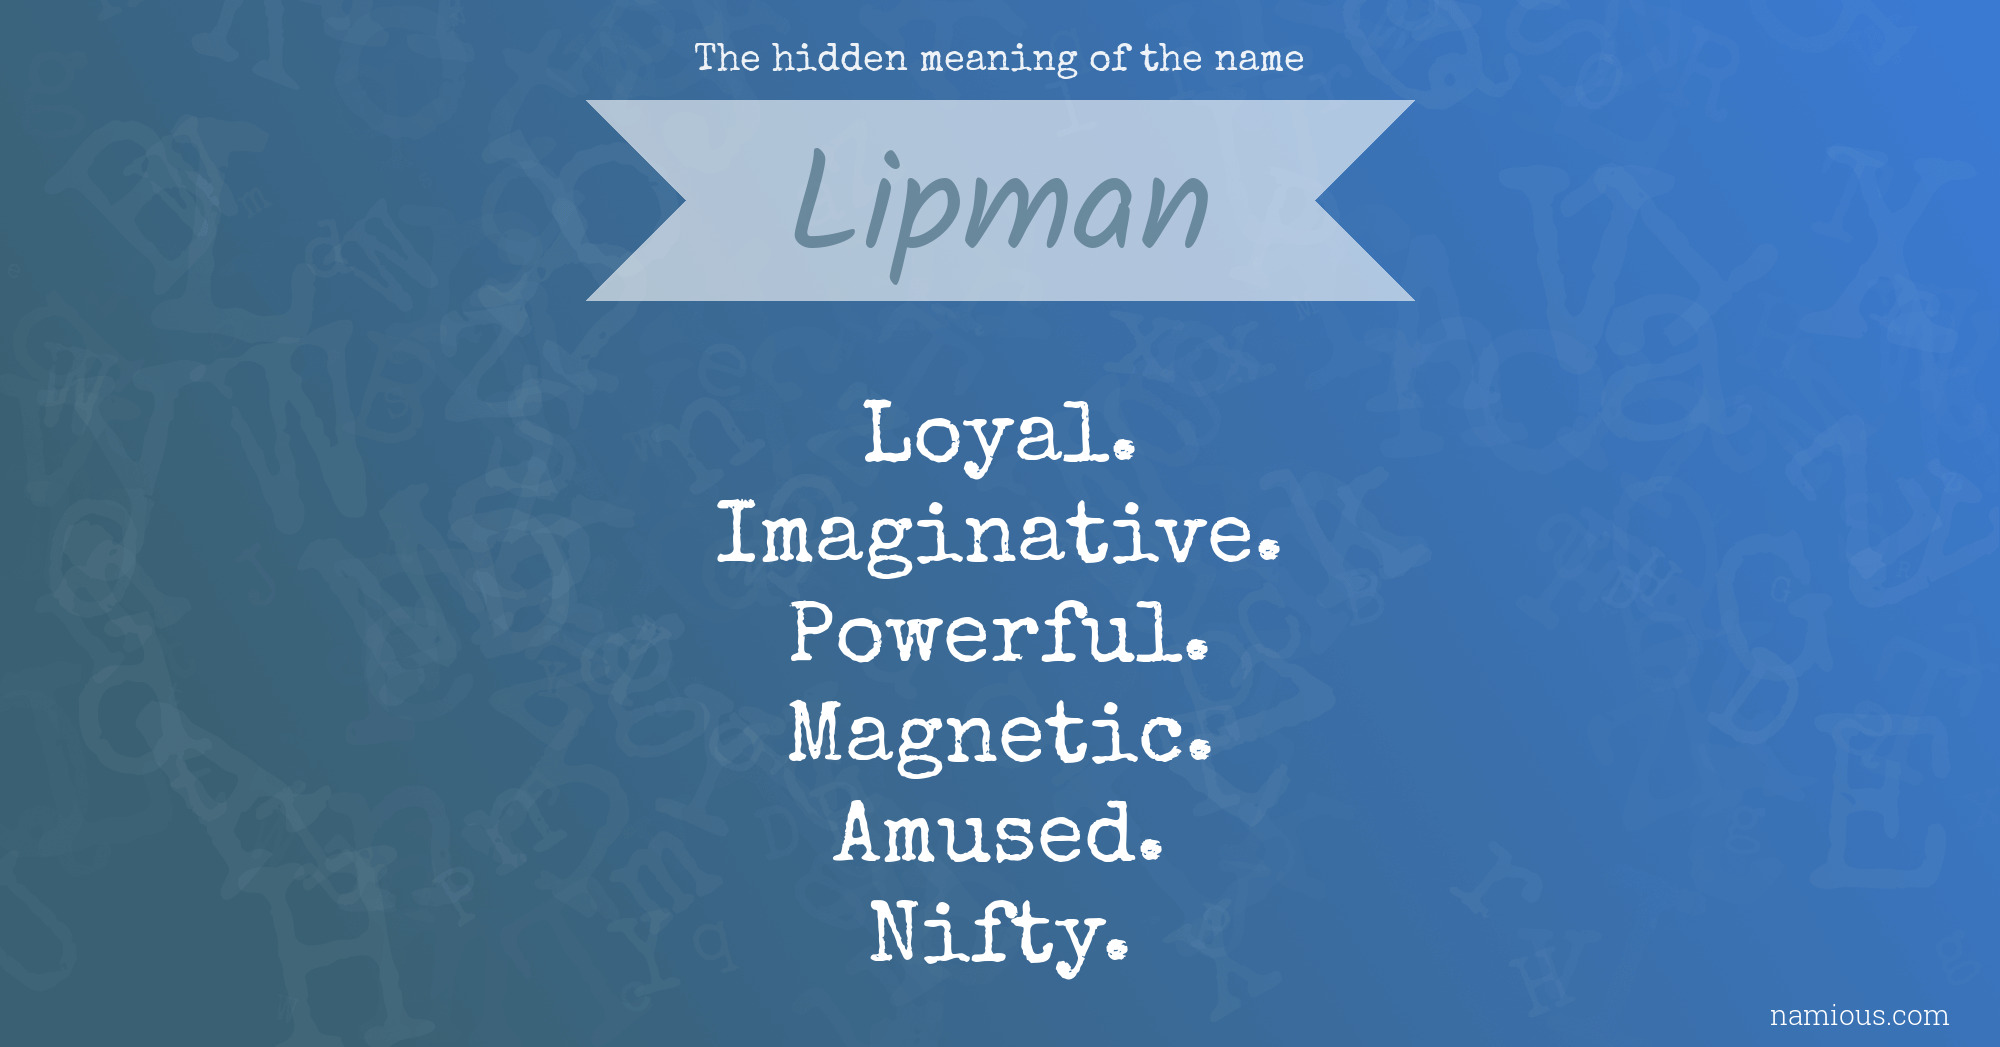 The hidden meaning of the name Lipman